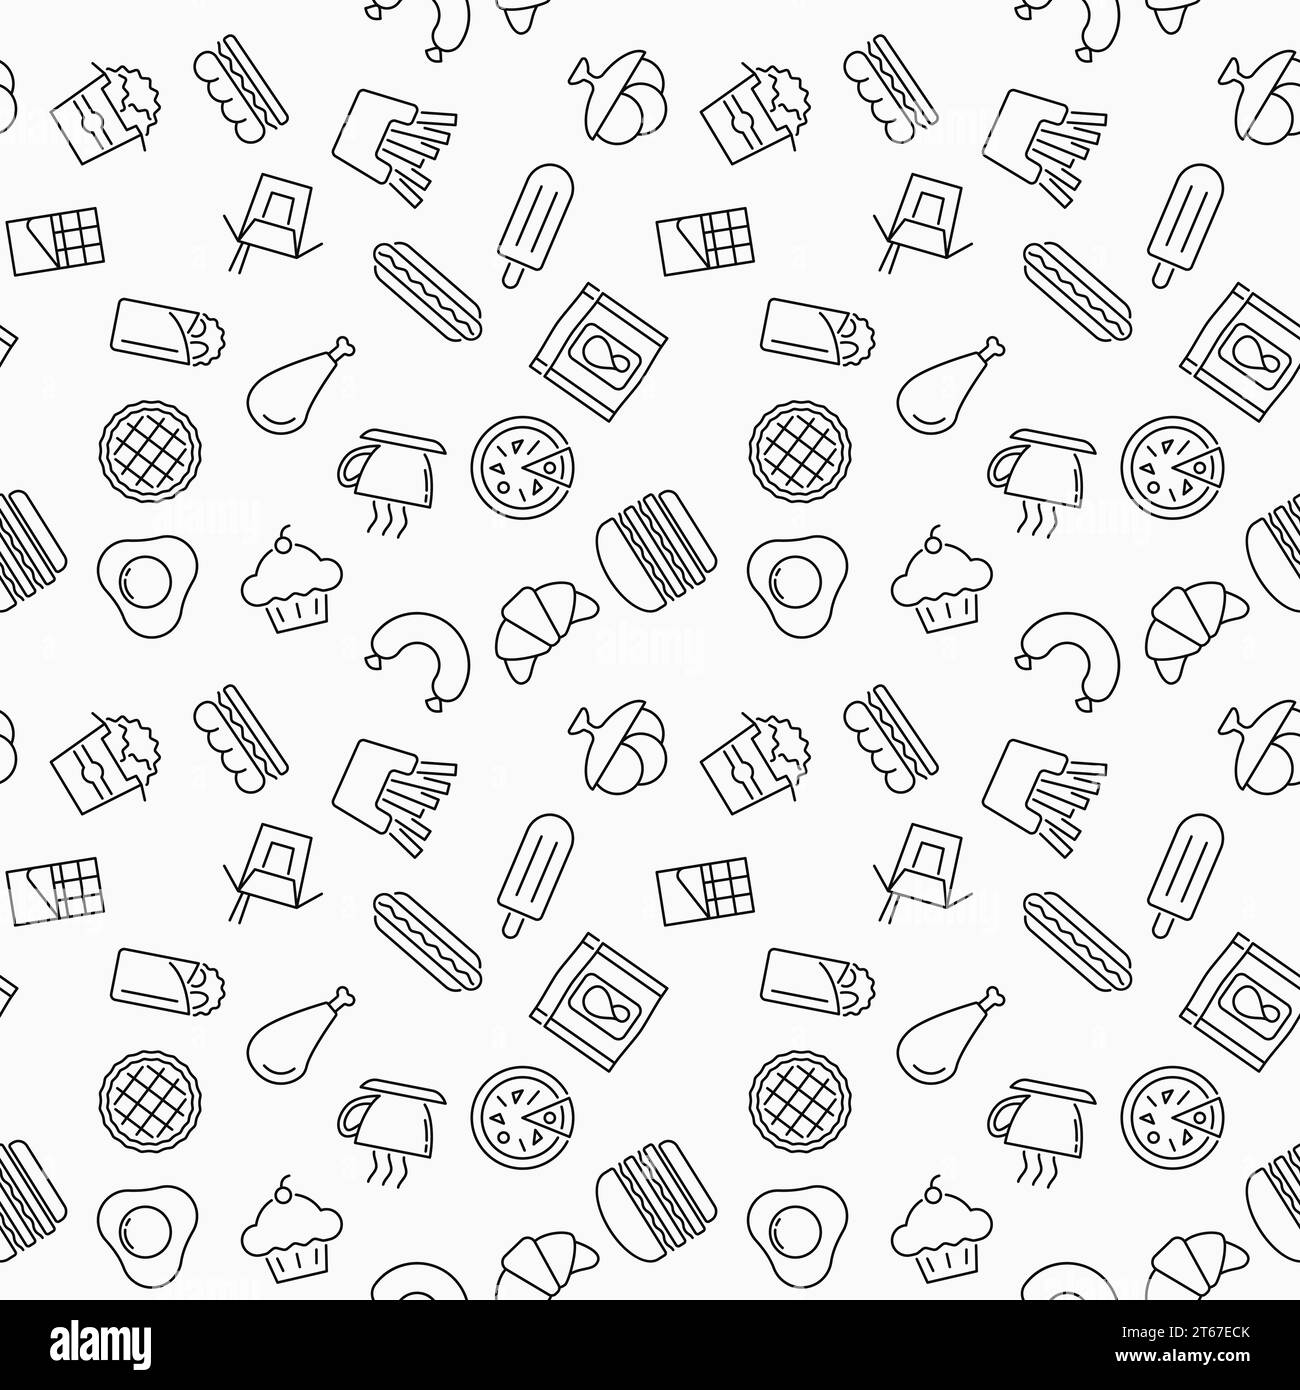 Simple fast food vector seamless pattern or texture made with thin line fast food icons Stock Vector